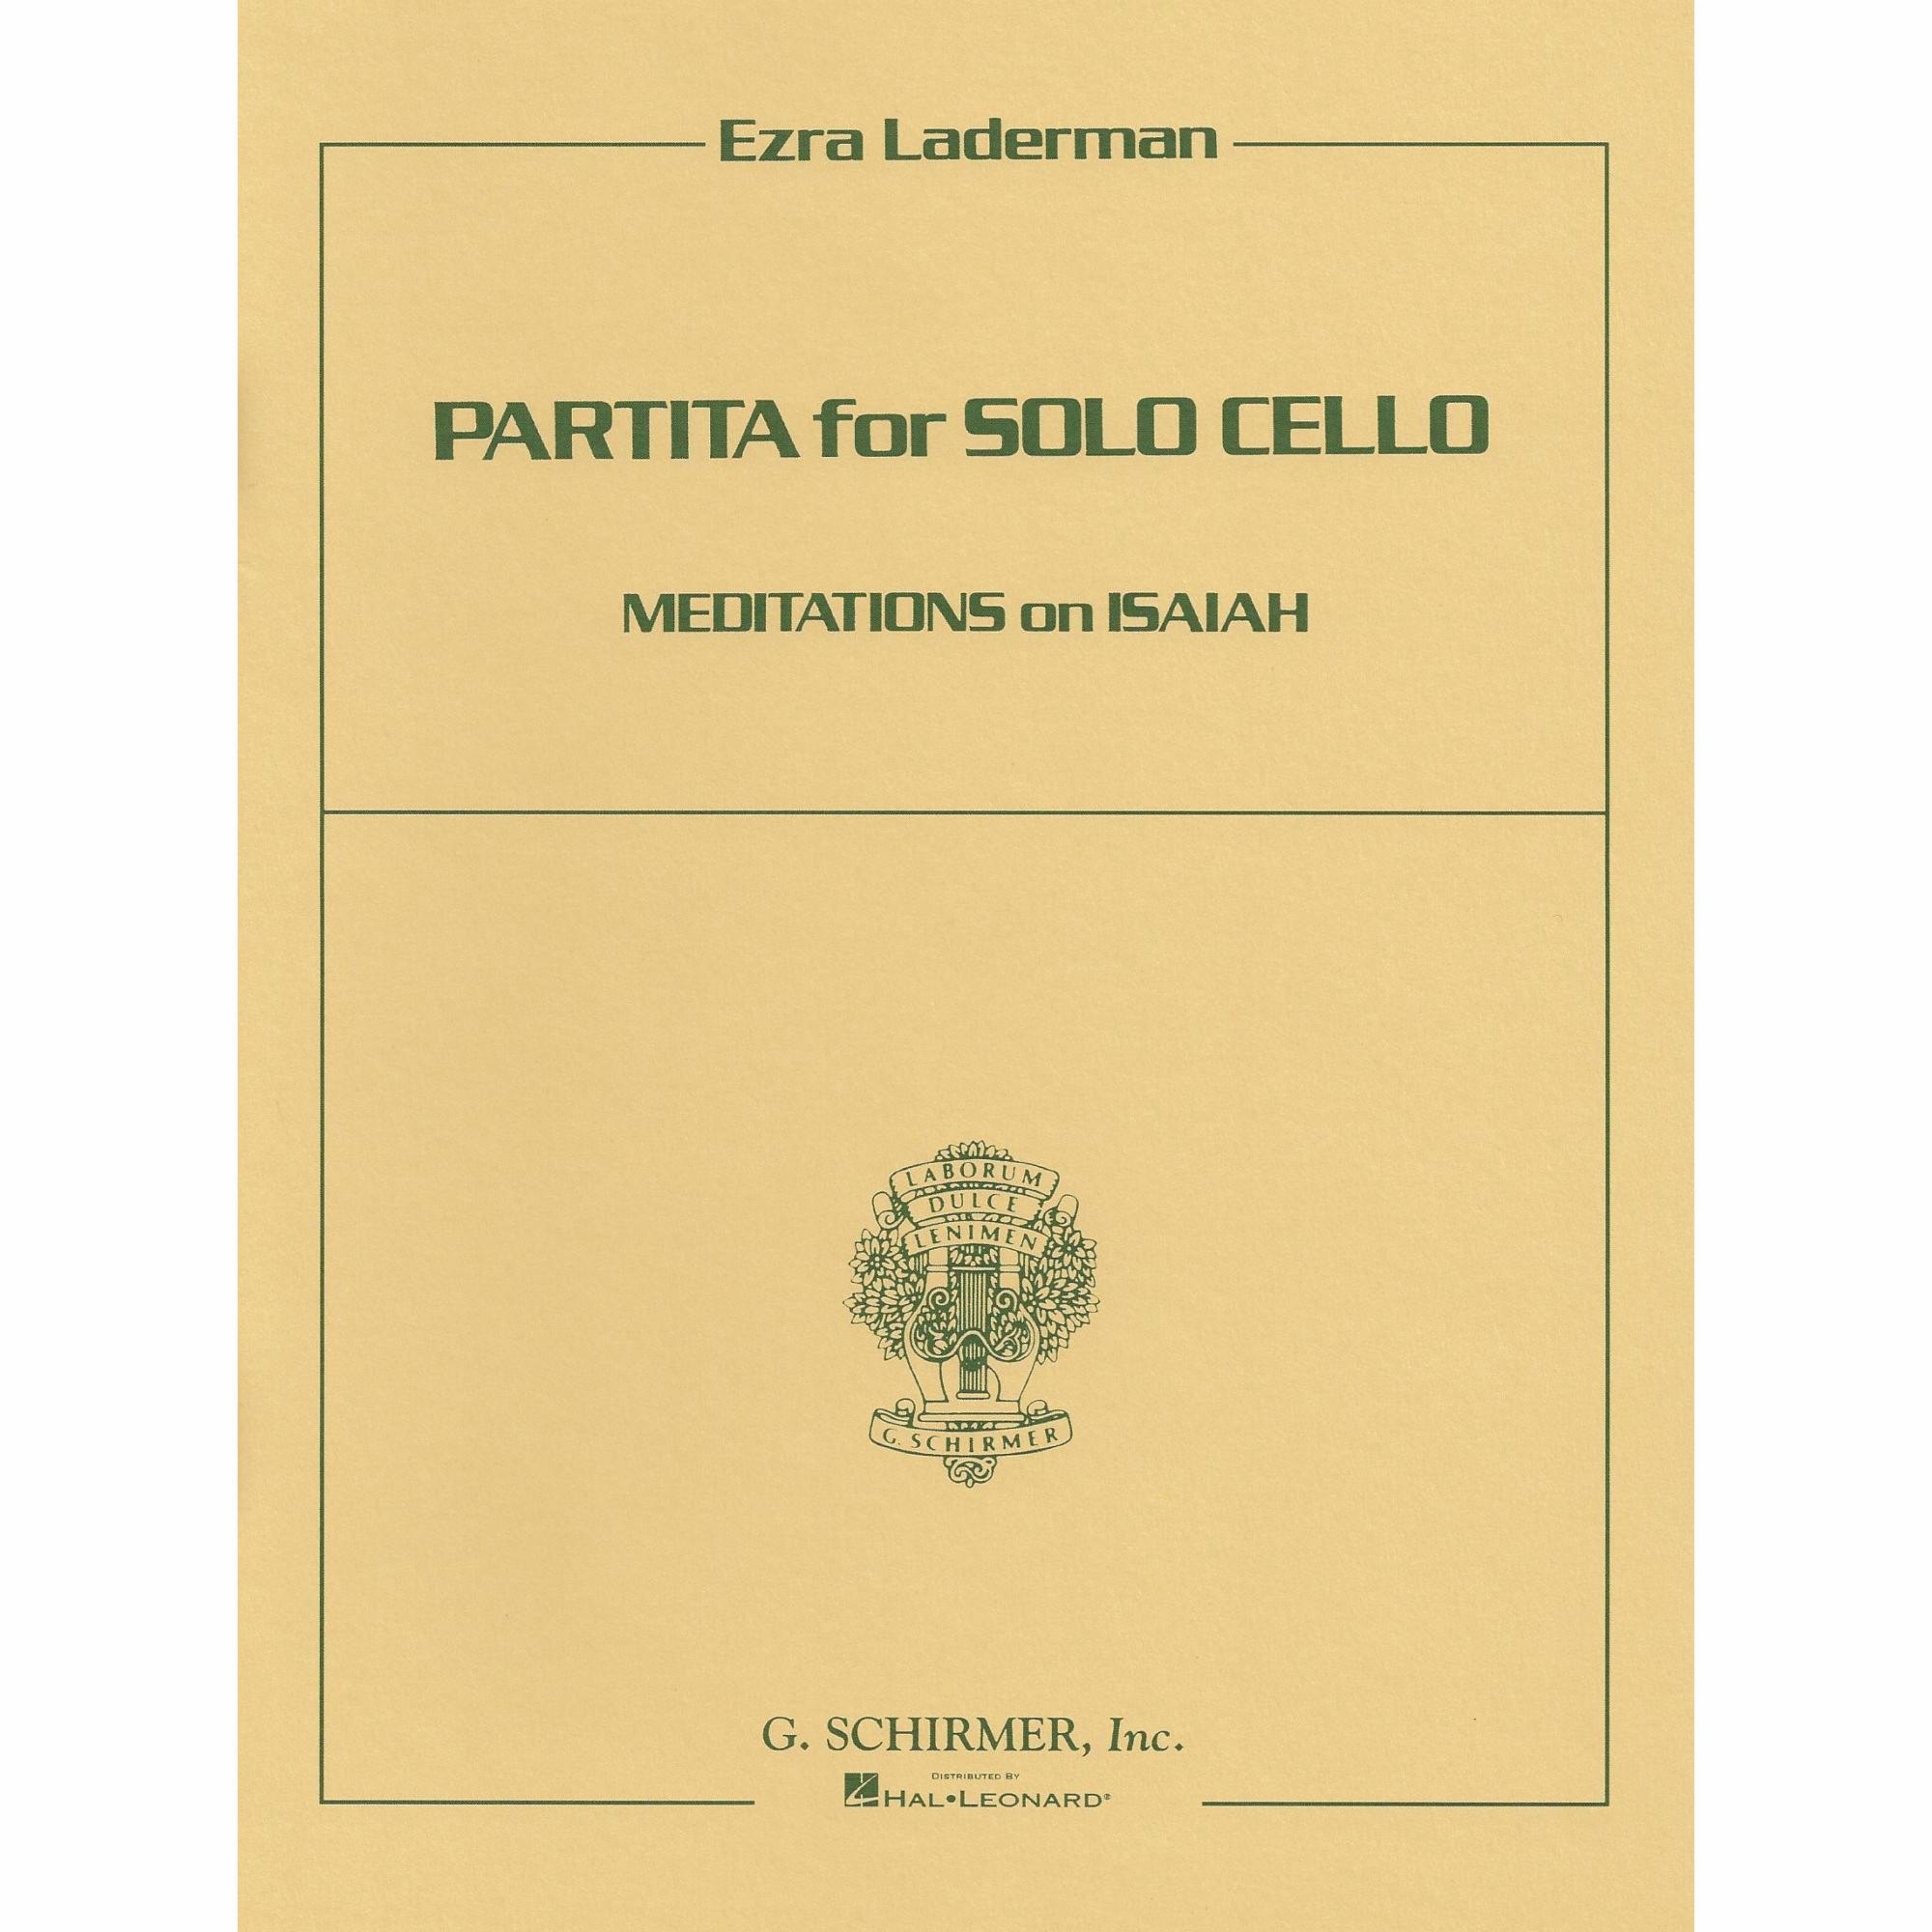 Laderman -- Partita for Solo Cello: Meditations on Isaiah